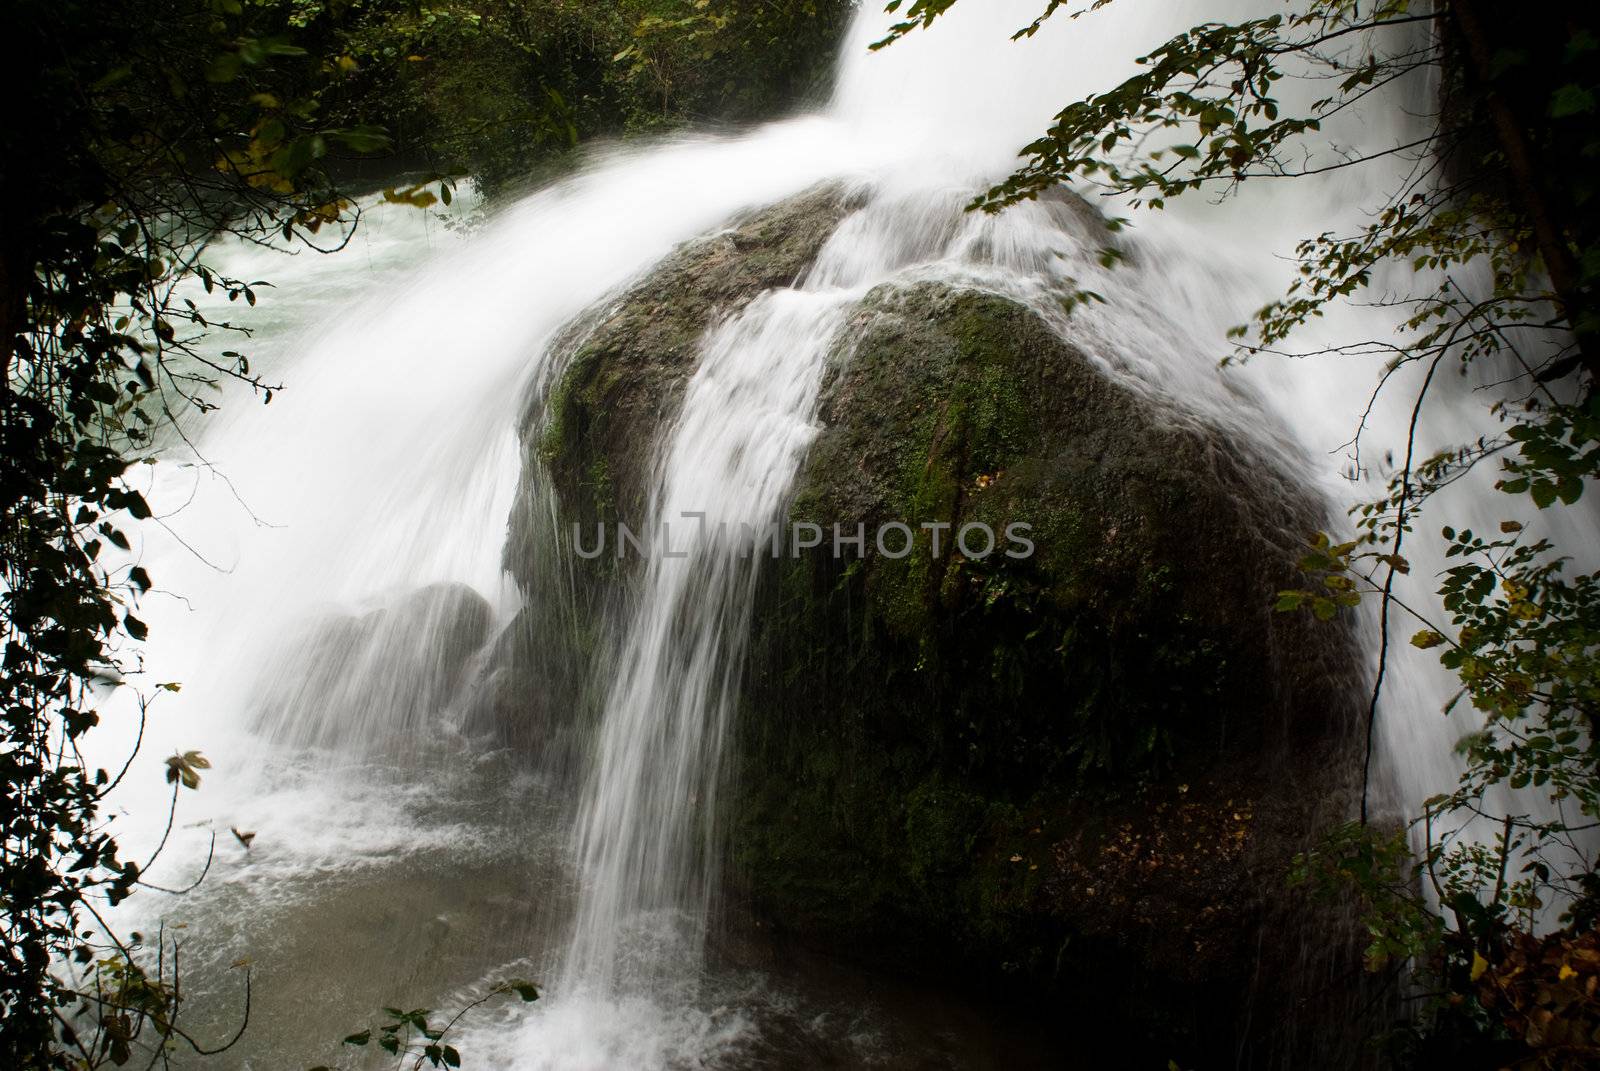 An image of Marmore Falls in Terni, Umbria Italy. 